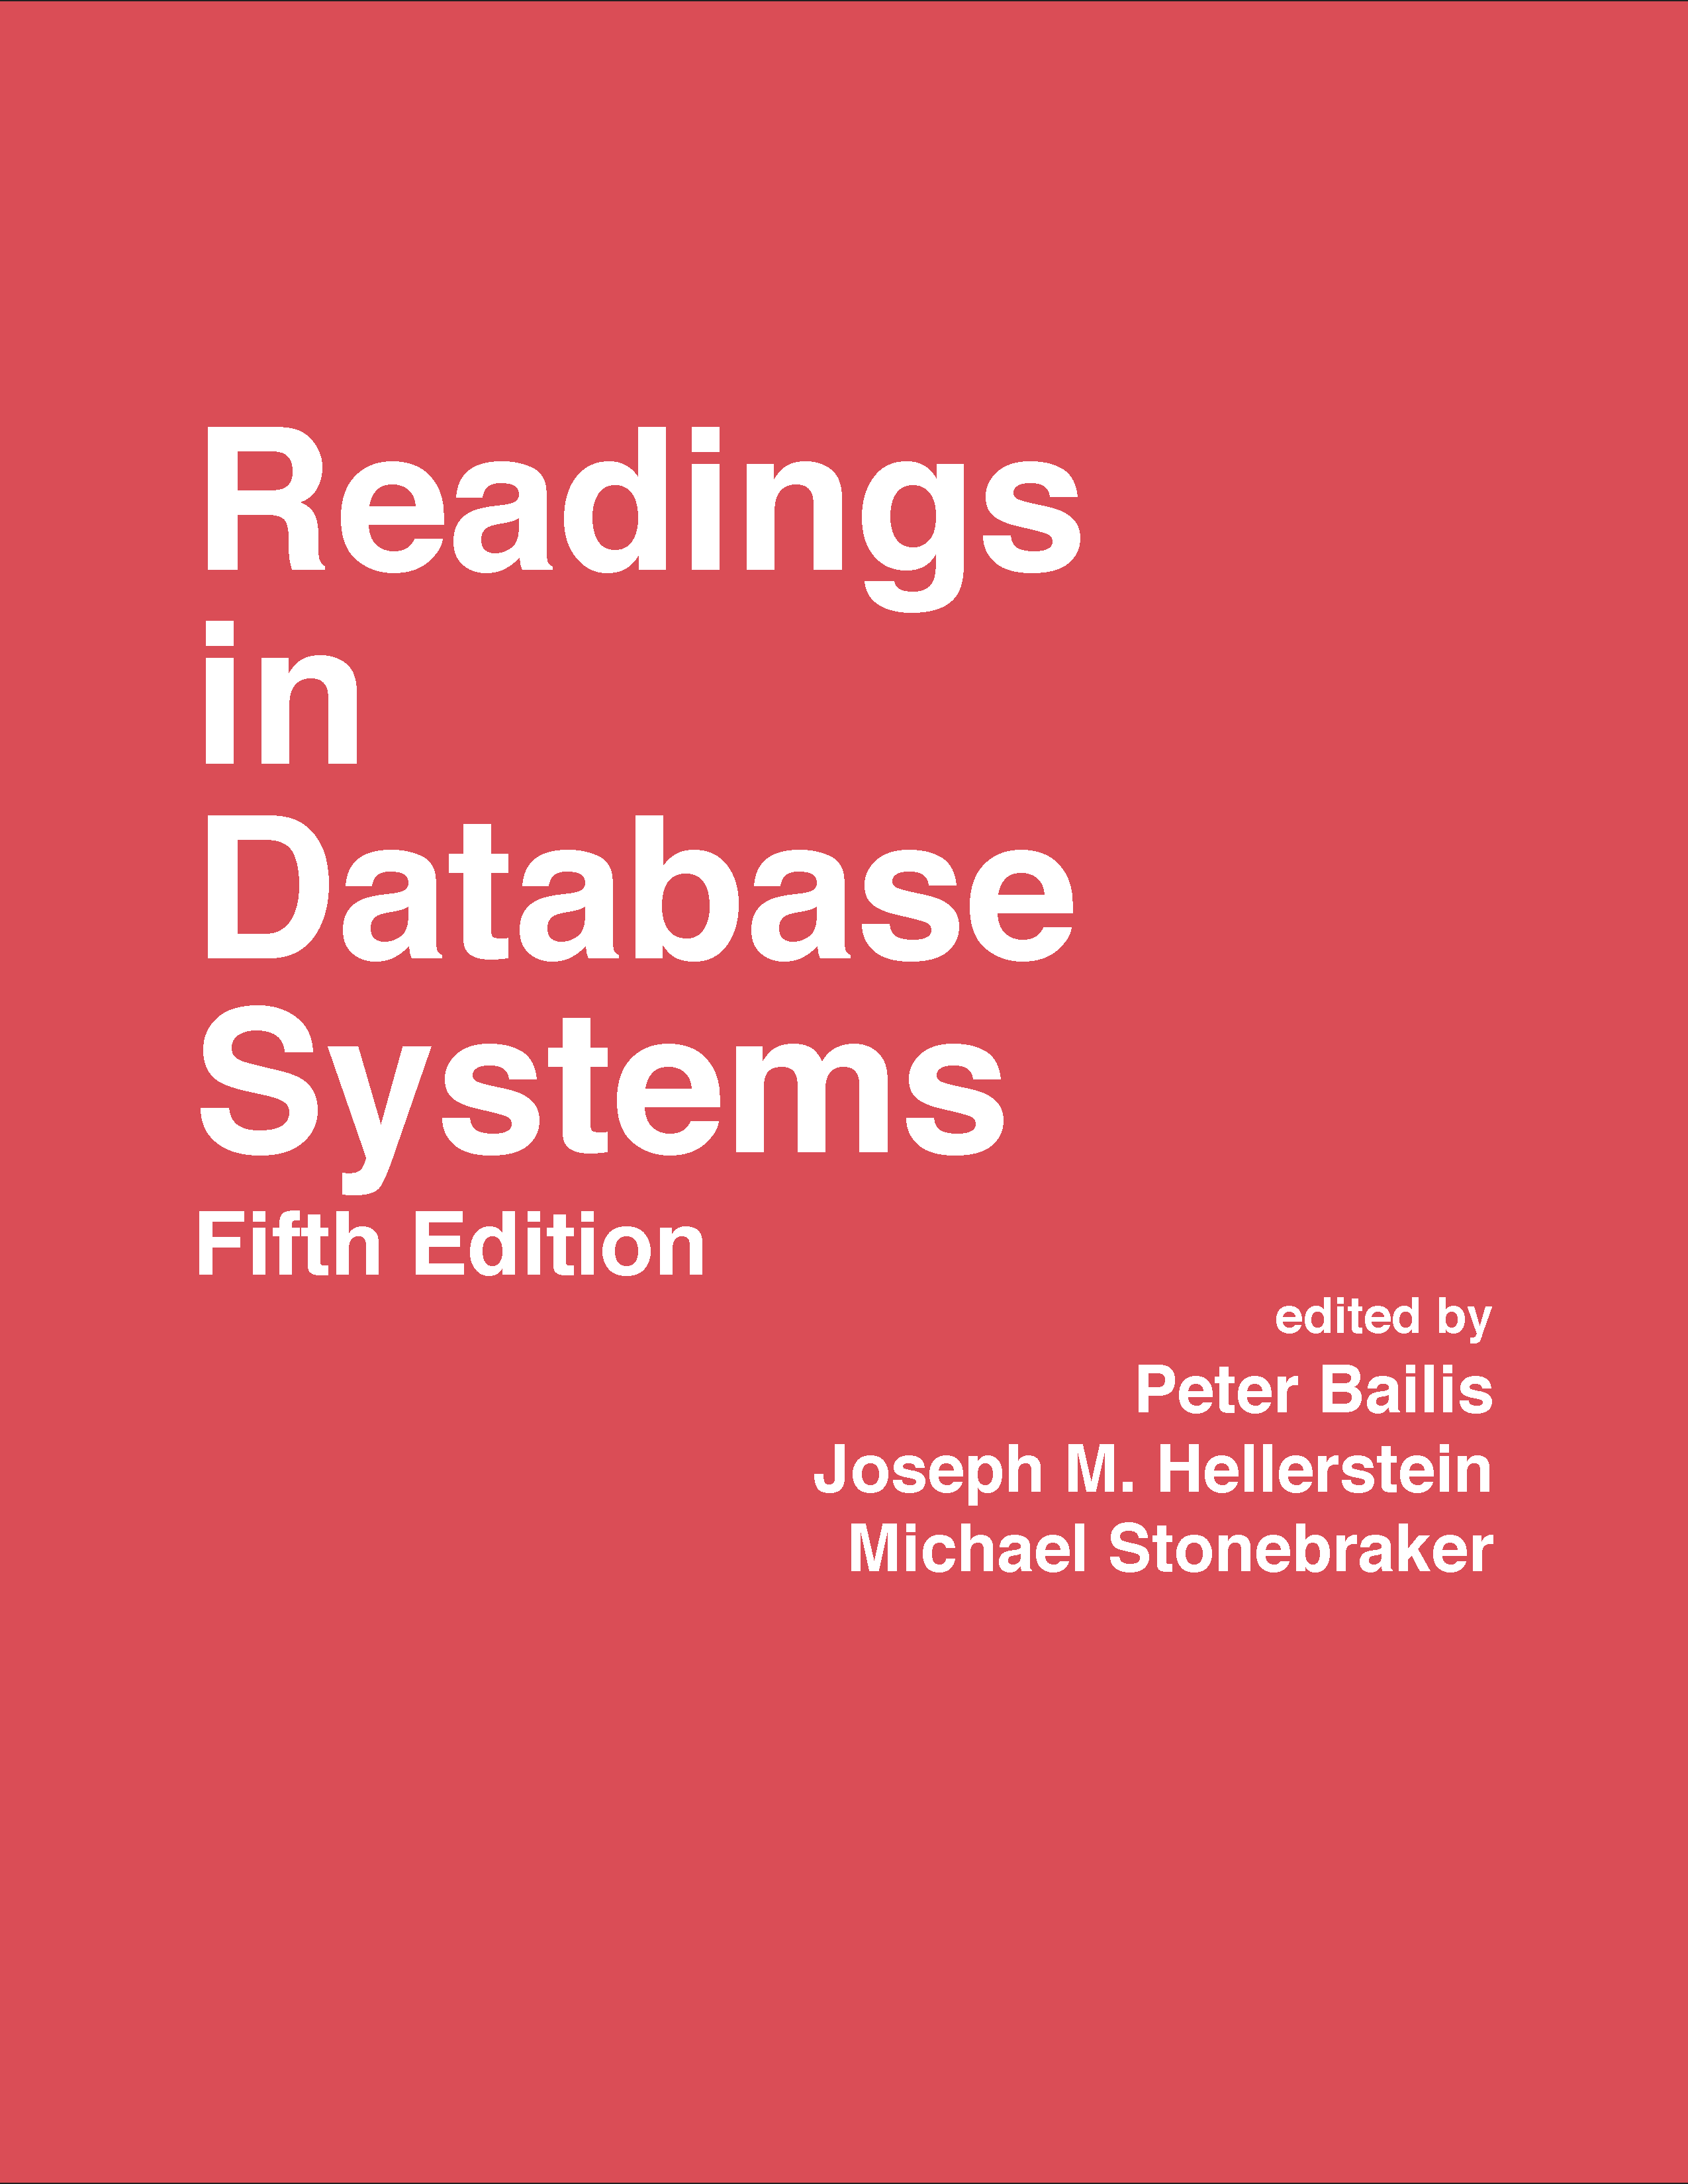 Readings in Database Systems, 5th Edition